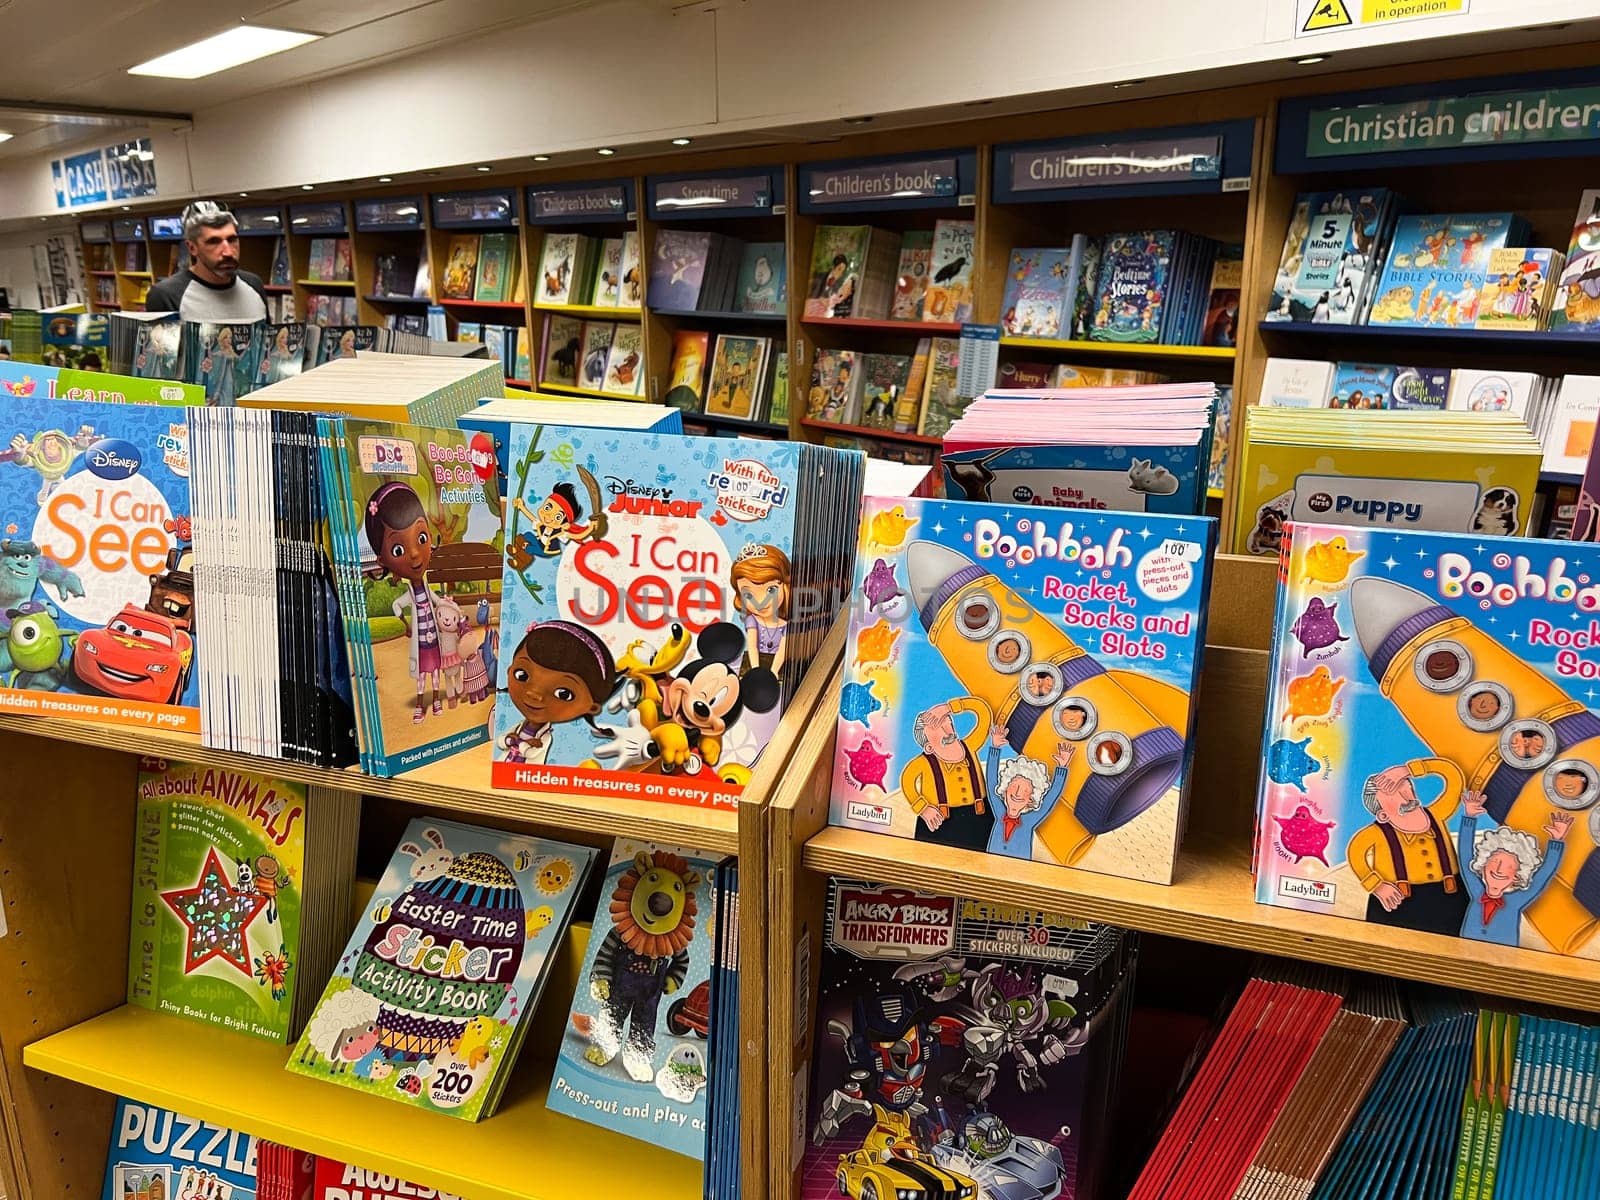 Colorful educational picture books and comics stand on the shelves in a bookstore. High quality photo